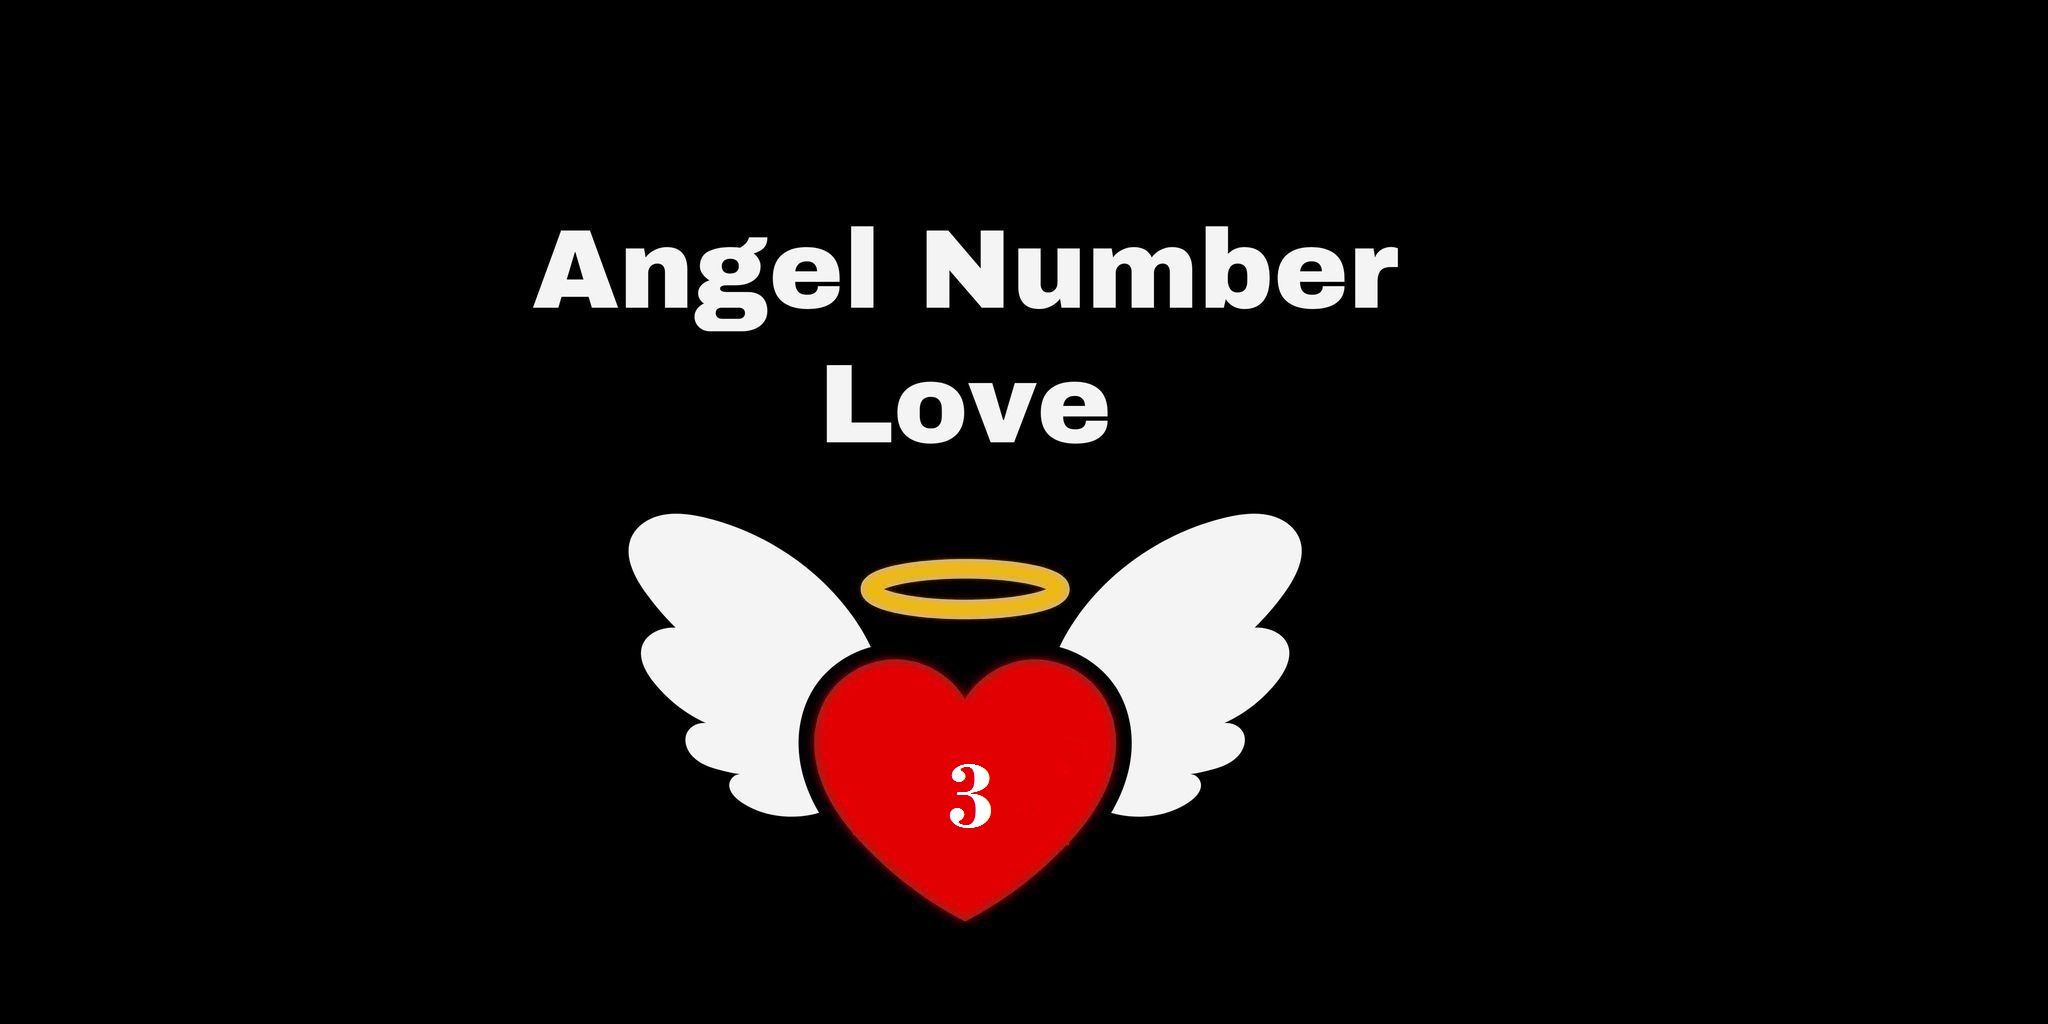 3 Angel Number Meaning In Love